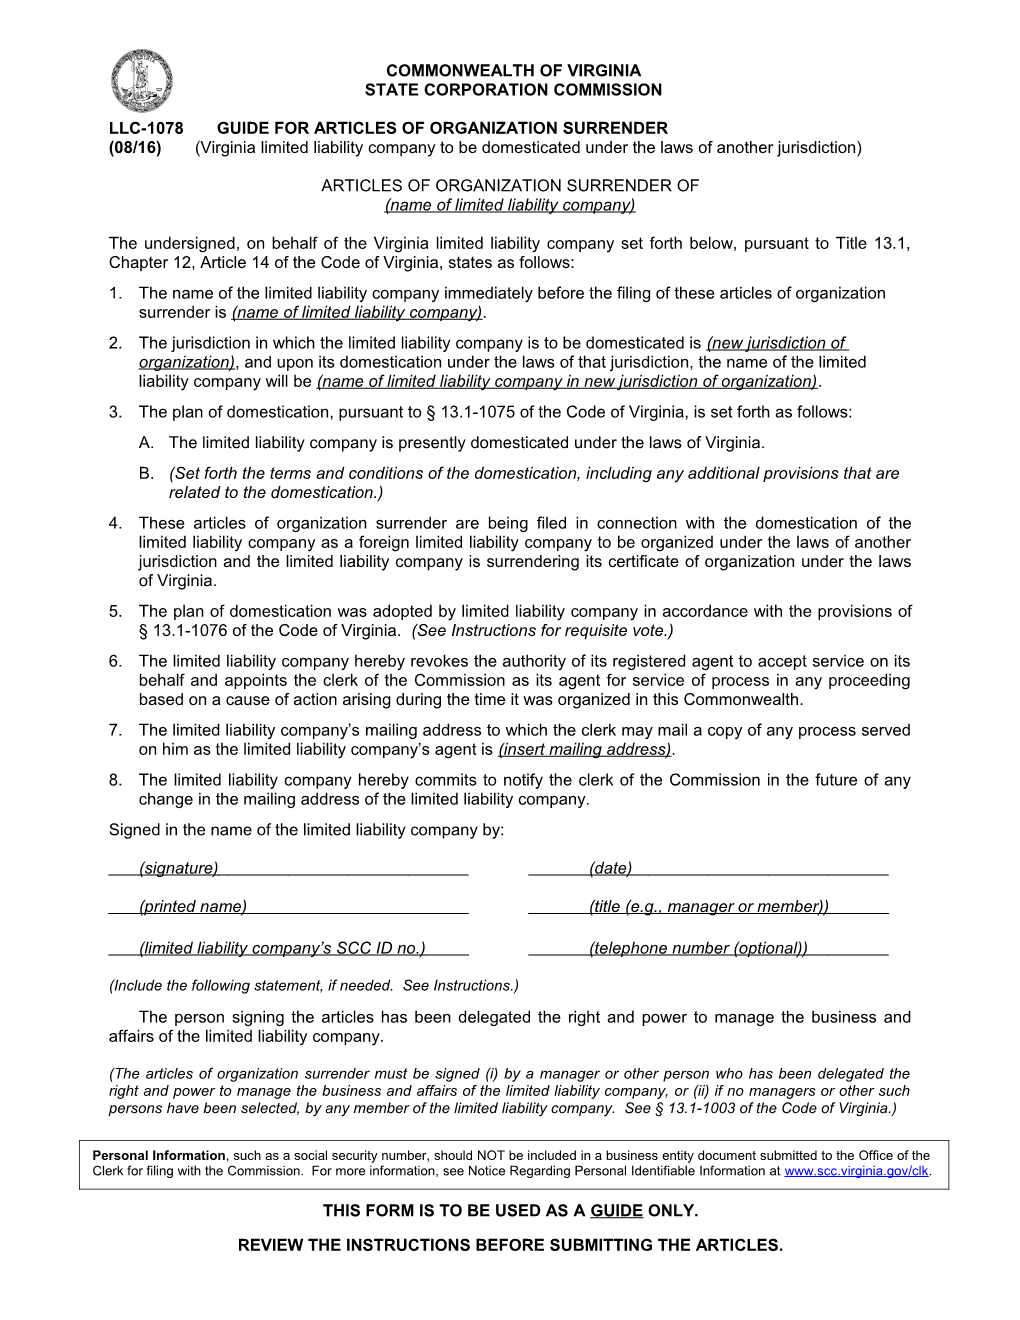 Llc-1078Guide for Articles of Organization Surrender